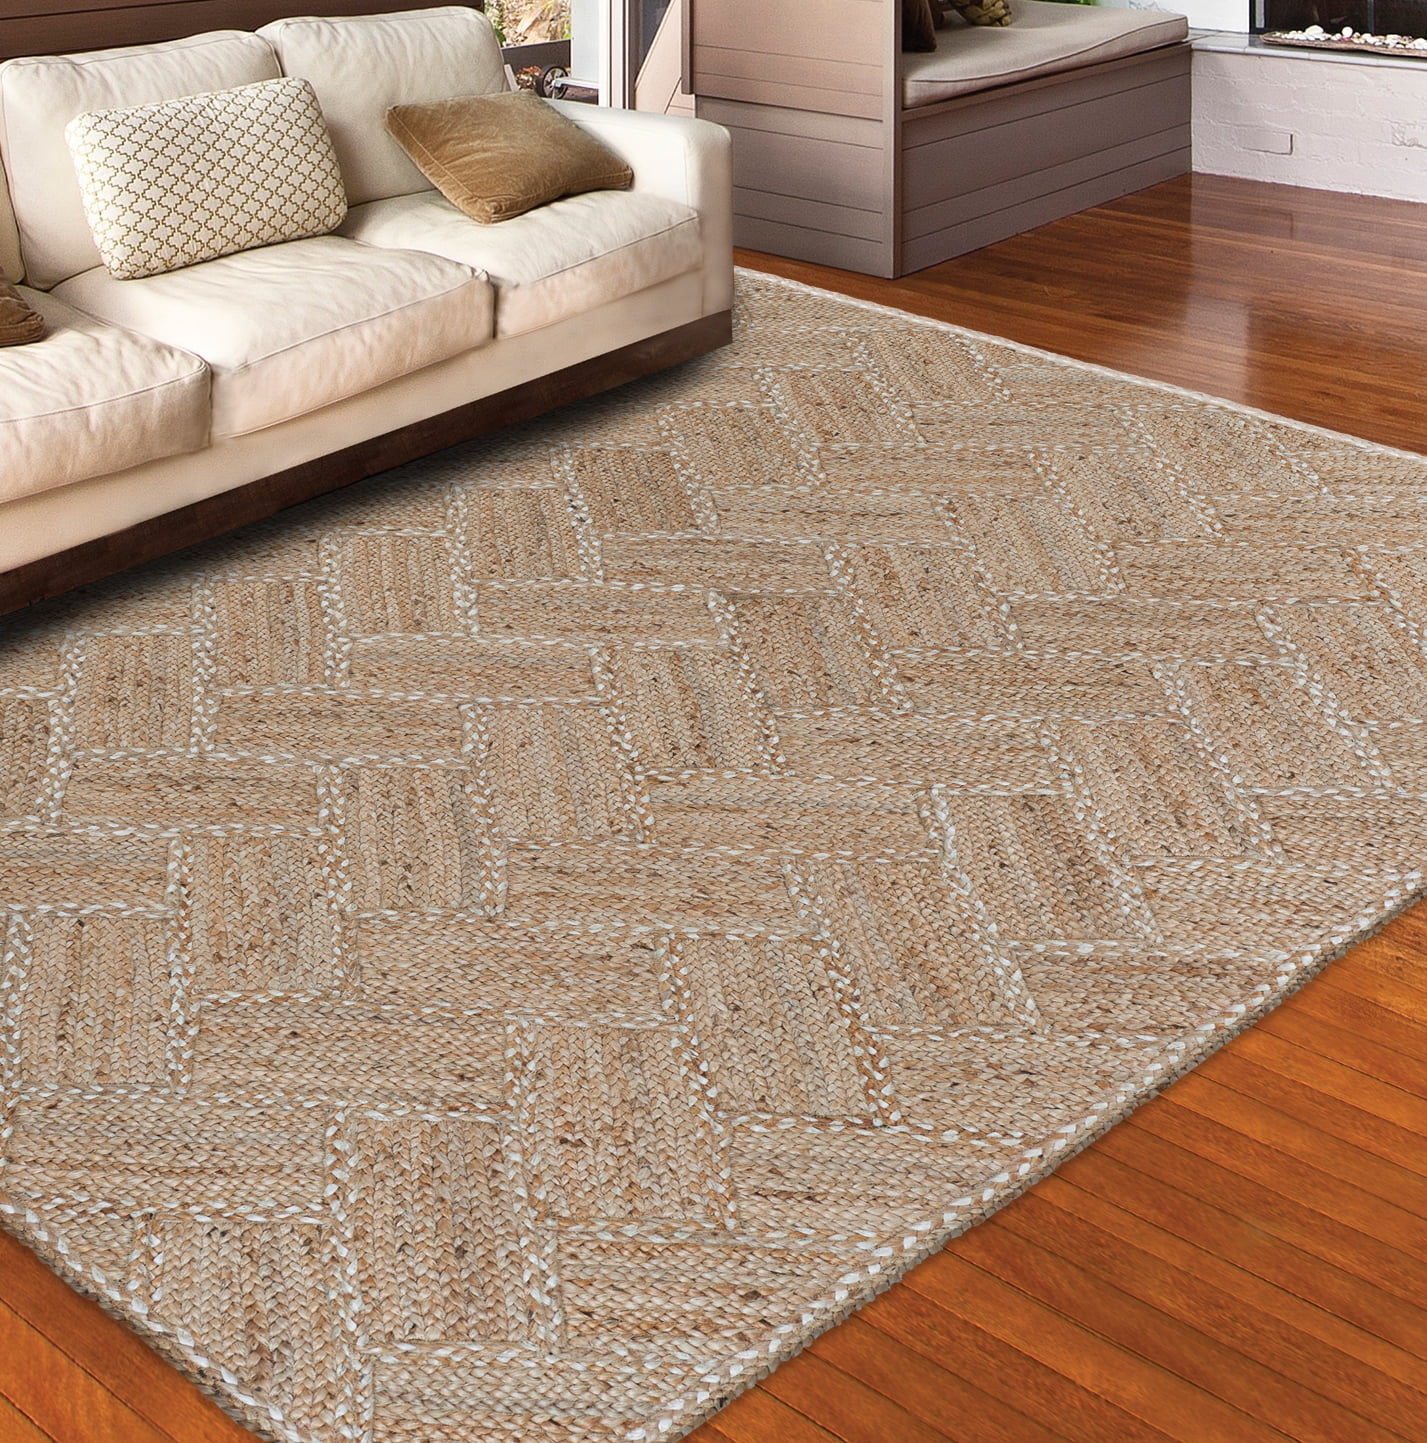 Couristan Nature's Elements Foothills Straw & Timber Rug 